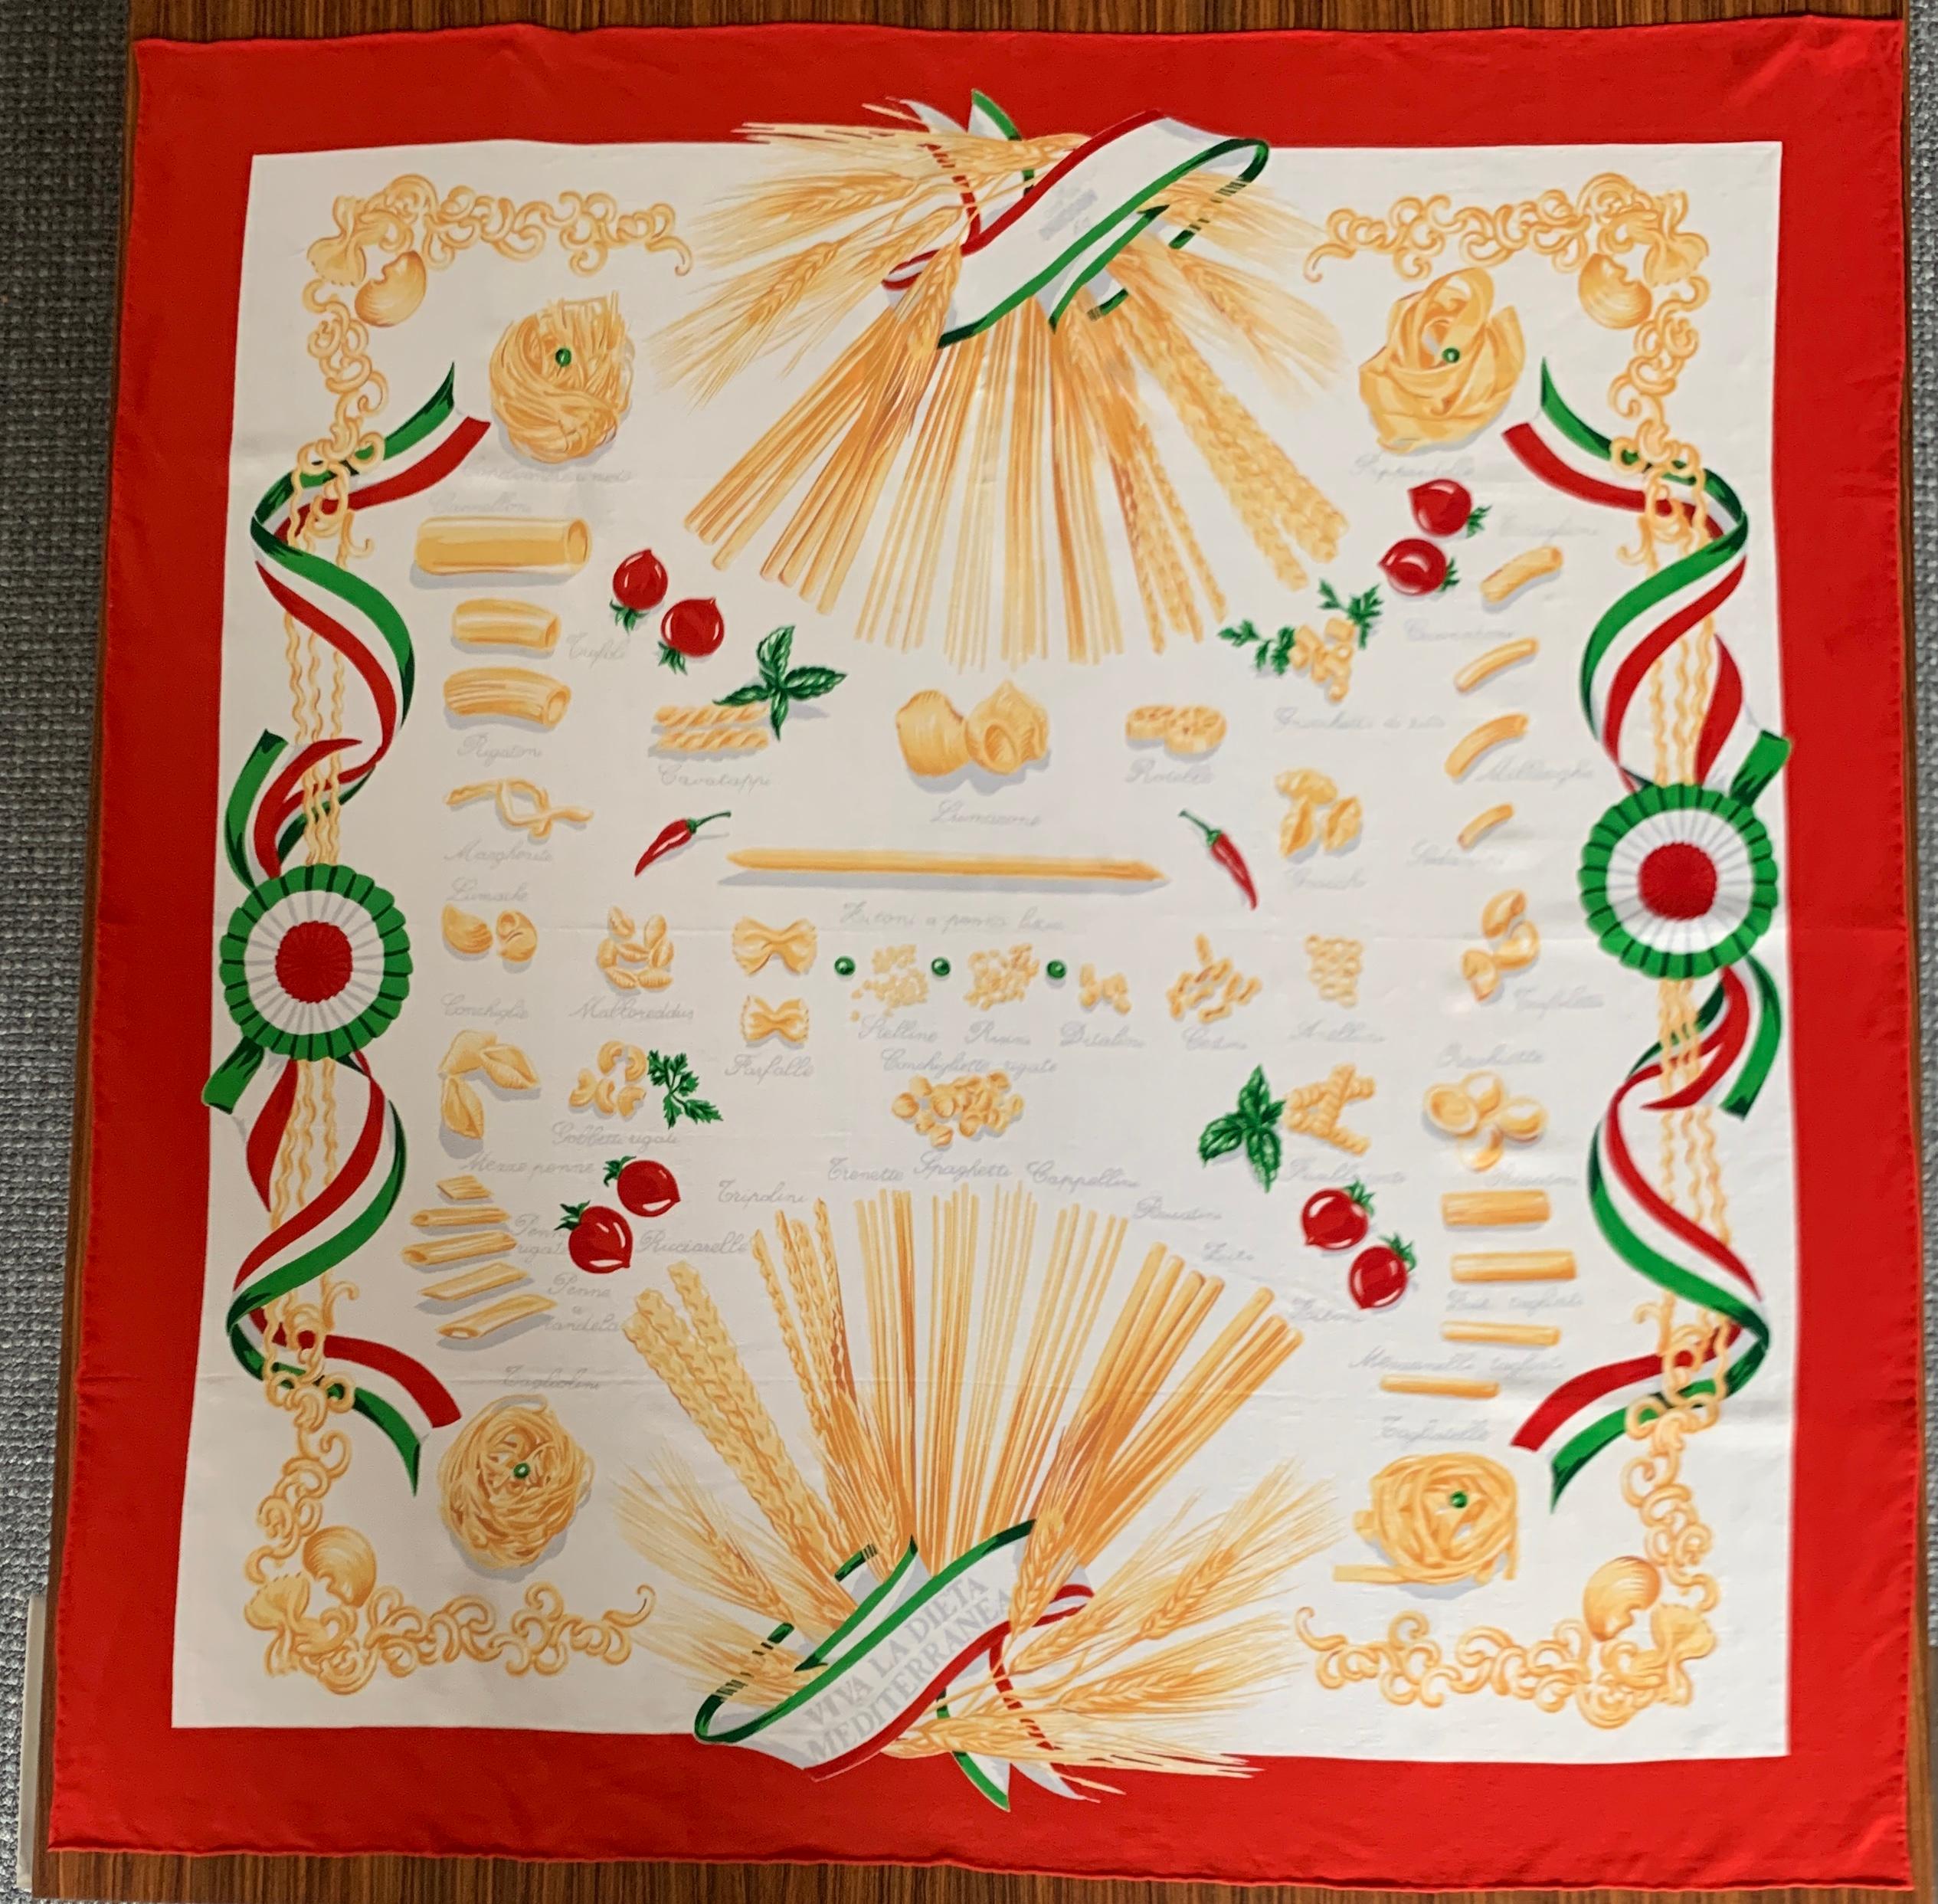 Moschino 90s white Italian pasta print scarf features an illustrated directory of all kinds of pasta. Tagliatelle, bucatini, farfalle, rigatoni-- it has it all! Red, white, and green ribbon illustration at sides. Hand rolled edges.

Fabric tag